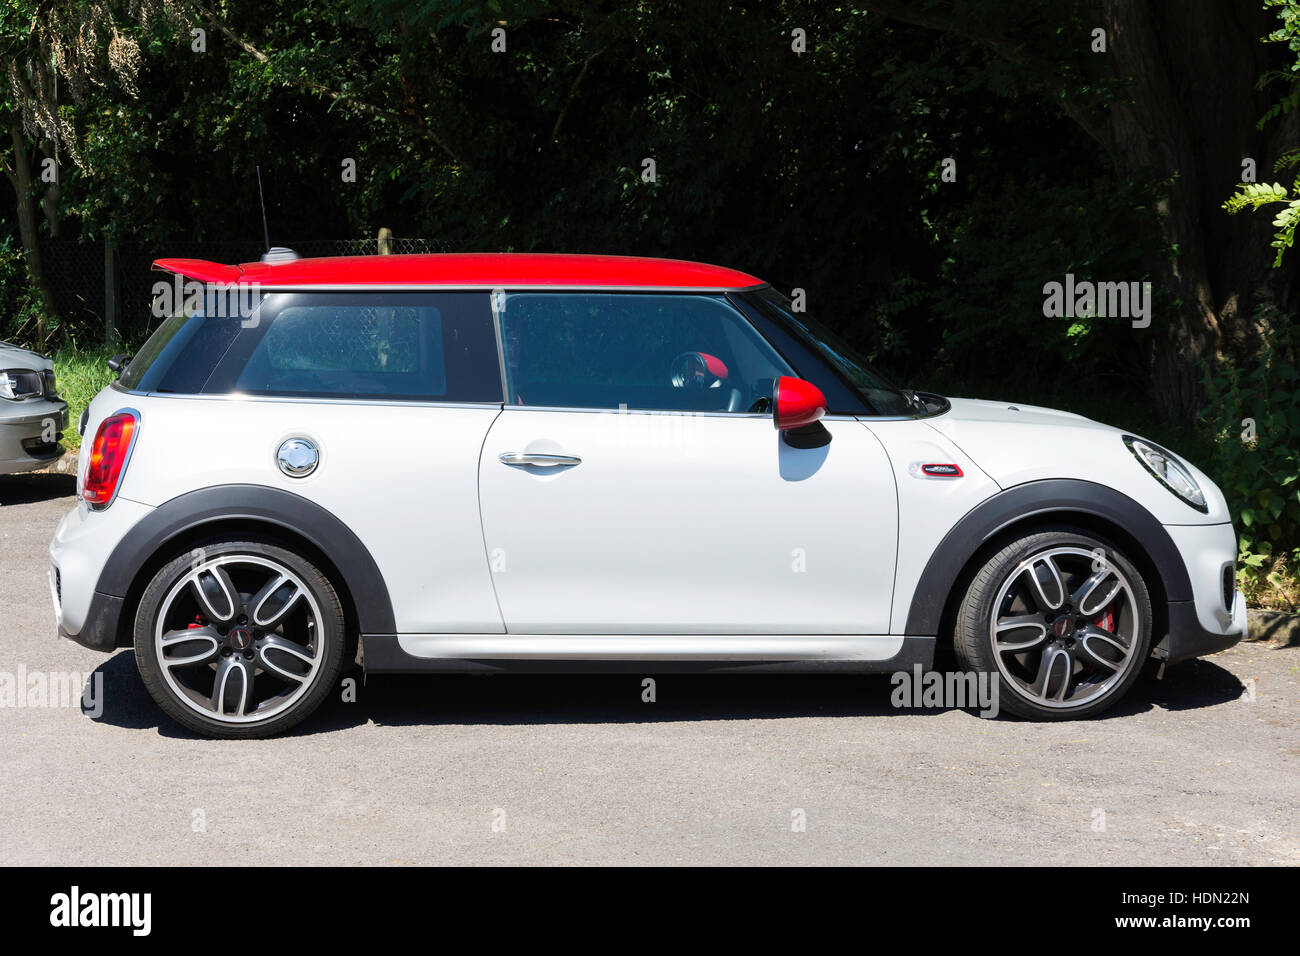 Red and white Mini (BMW) Cooper in parking area, Chobham, Surrey, England, United Kingdom Stock Photo